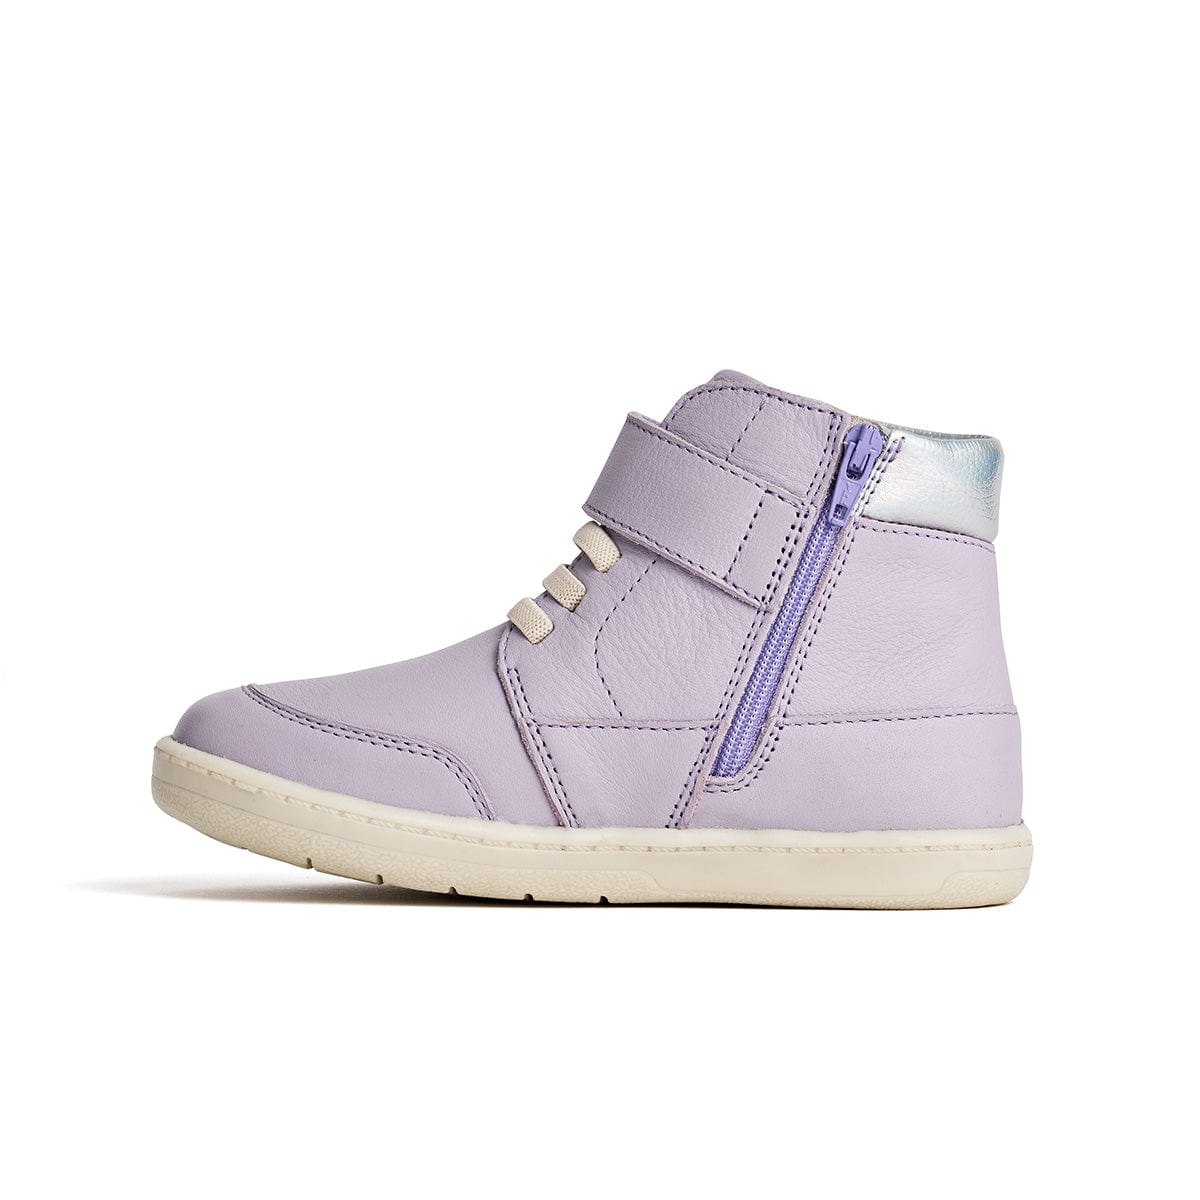 Pretty Brave Girls Shoes Harley Boot in Lilac